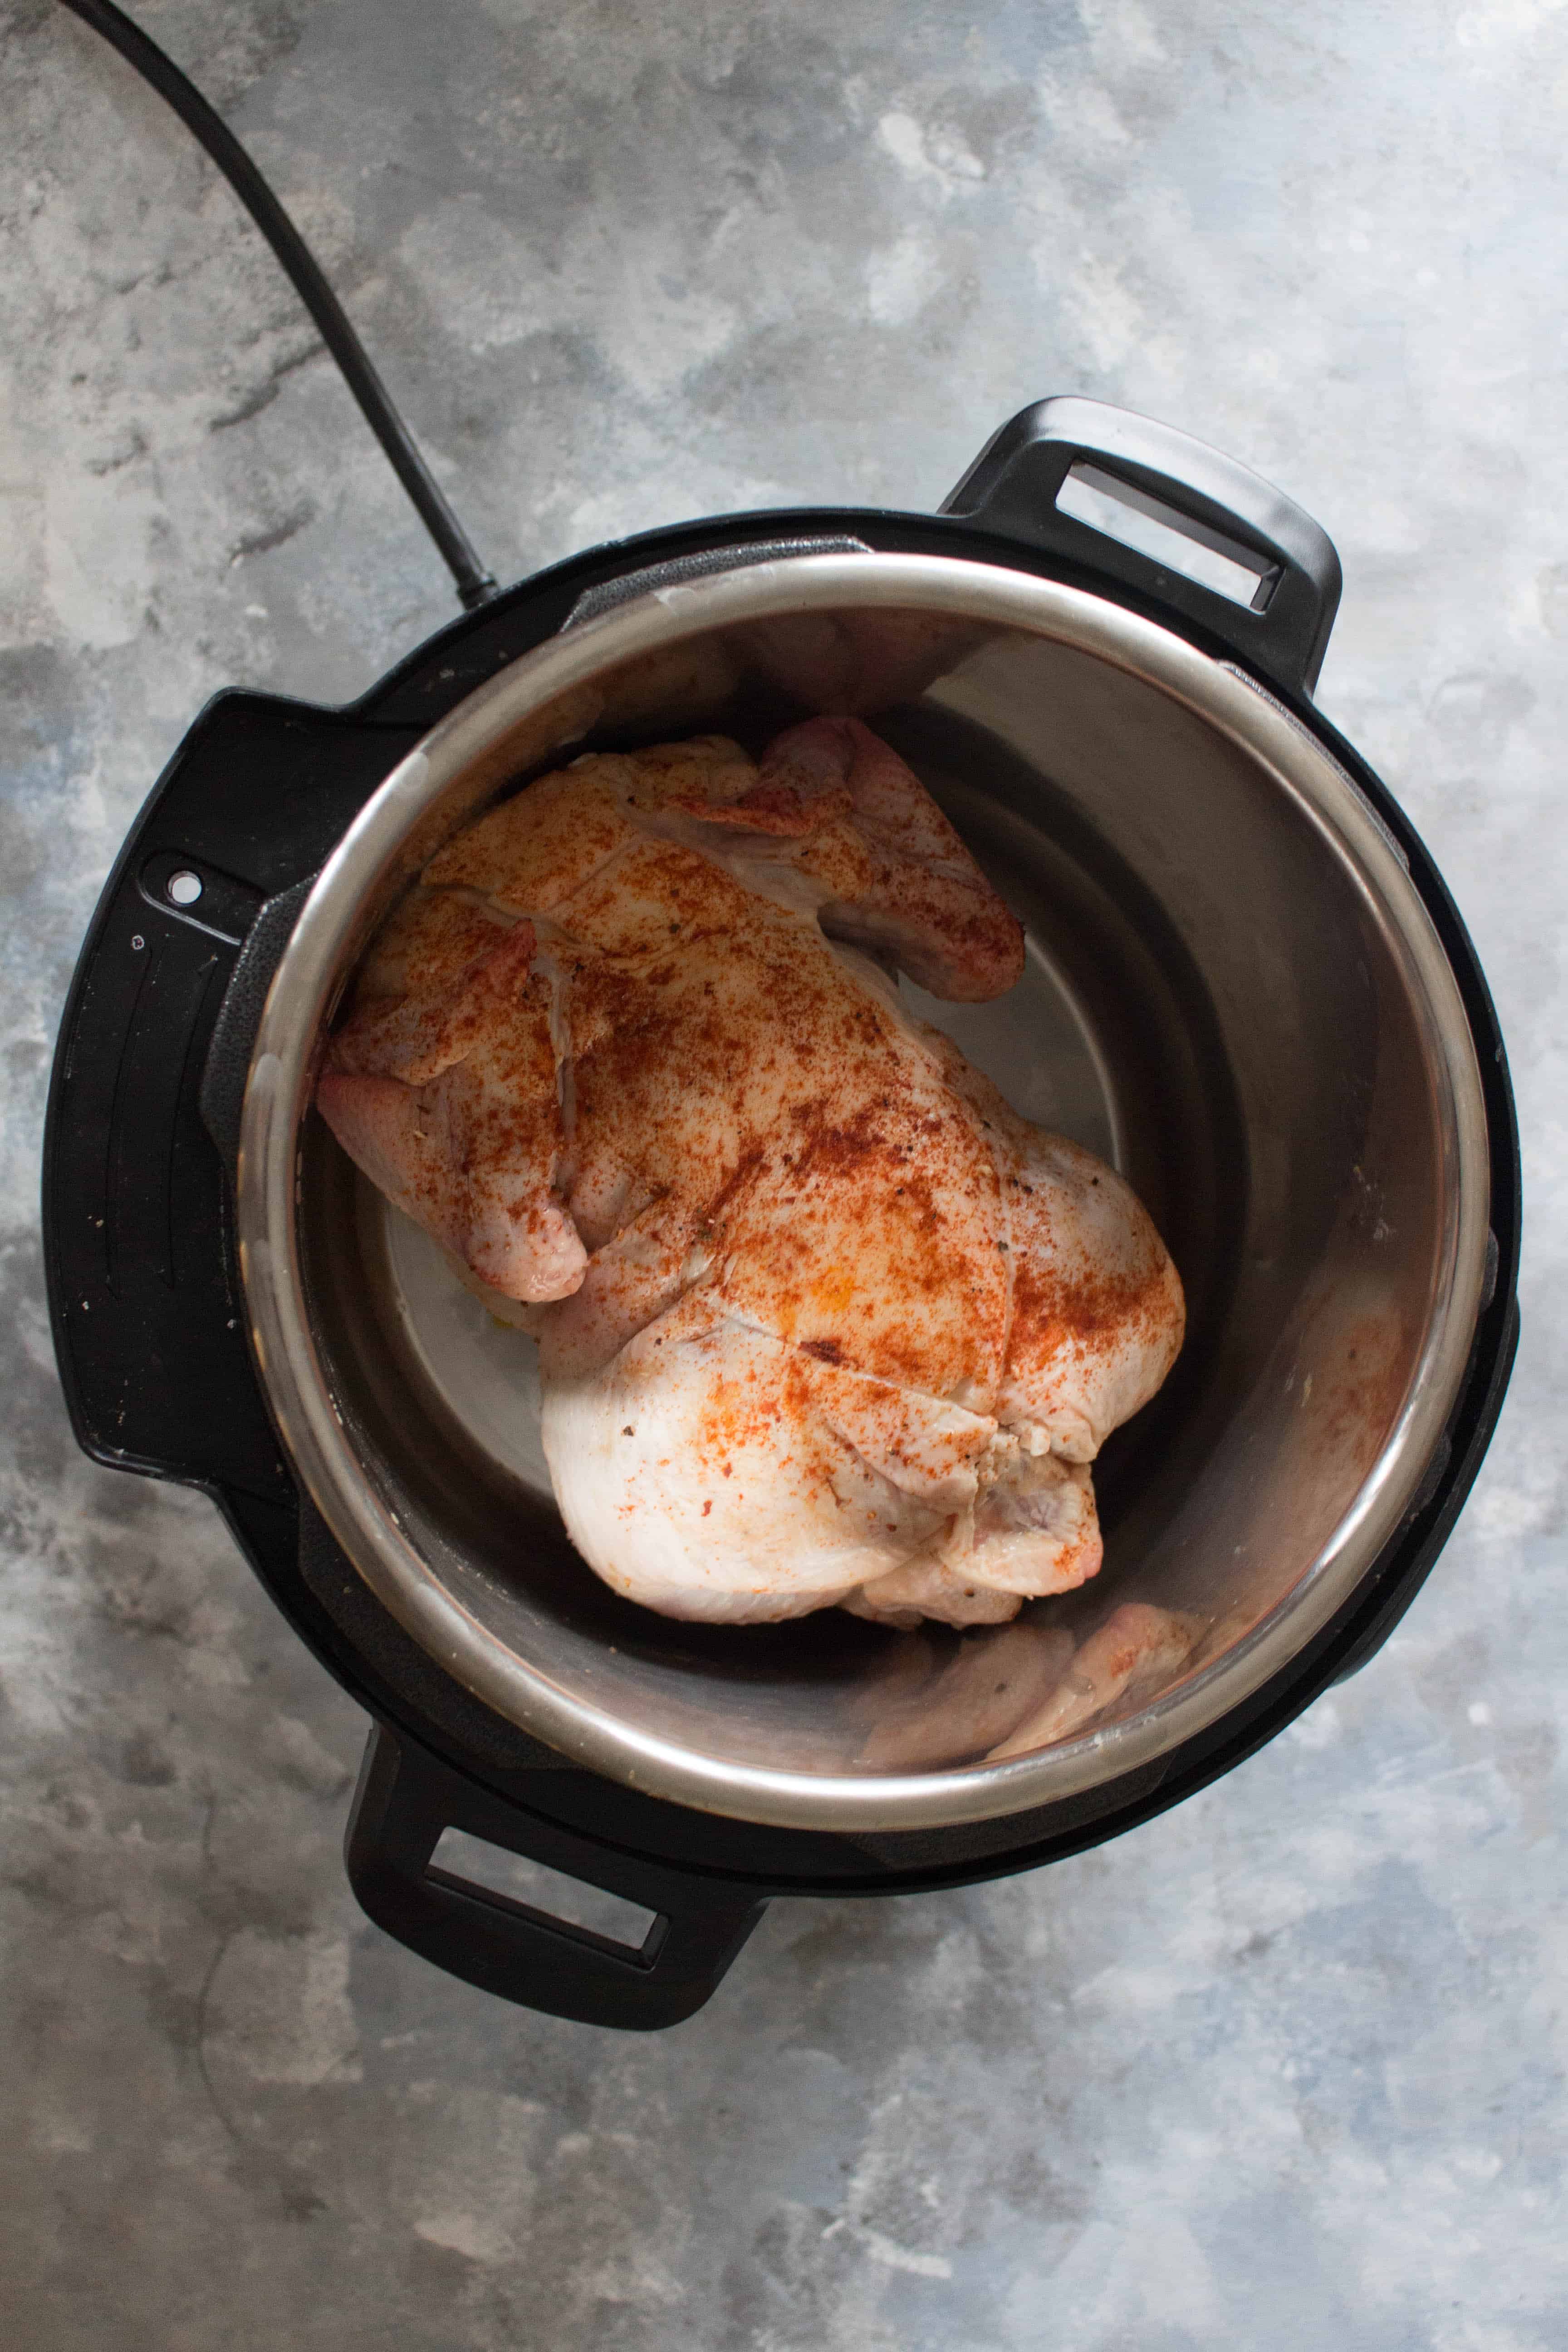 Seasoned Whole Chicken in Instant Pot | Curious as to how to cook a whole chicken in an Instant Pot? Keep reading to see how you can make a delicious, fall off the bone, and the juiciest whole chicken in an Instant Pot!